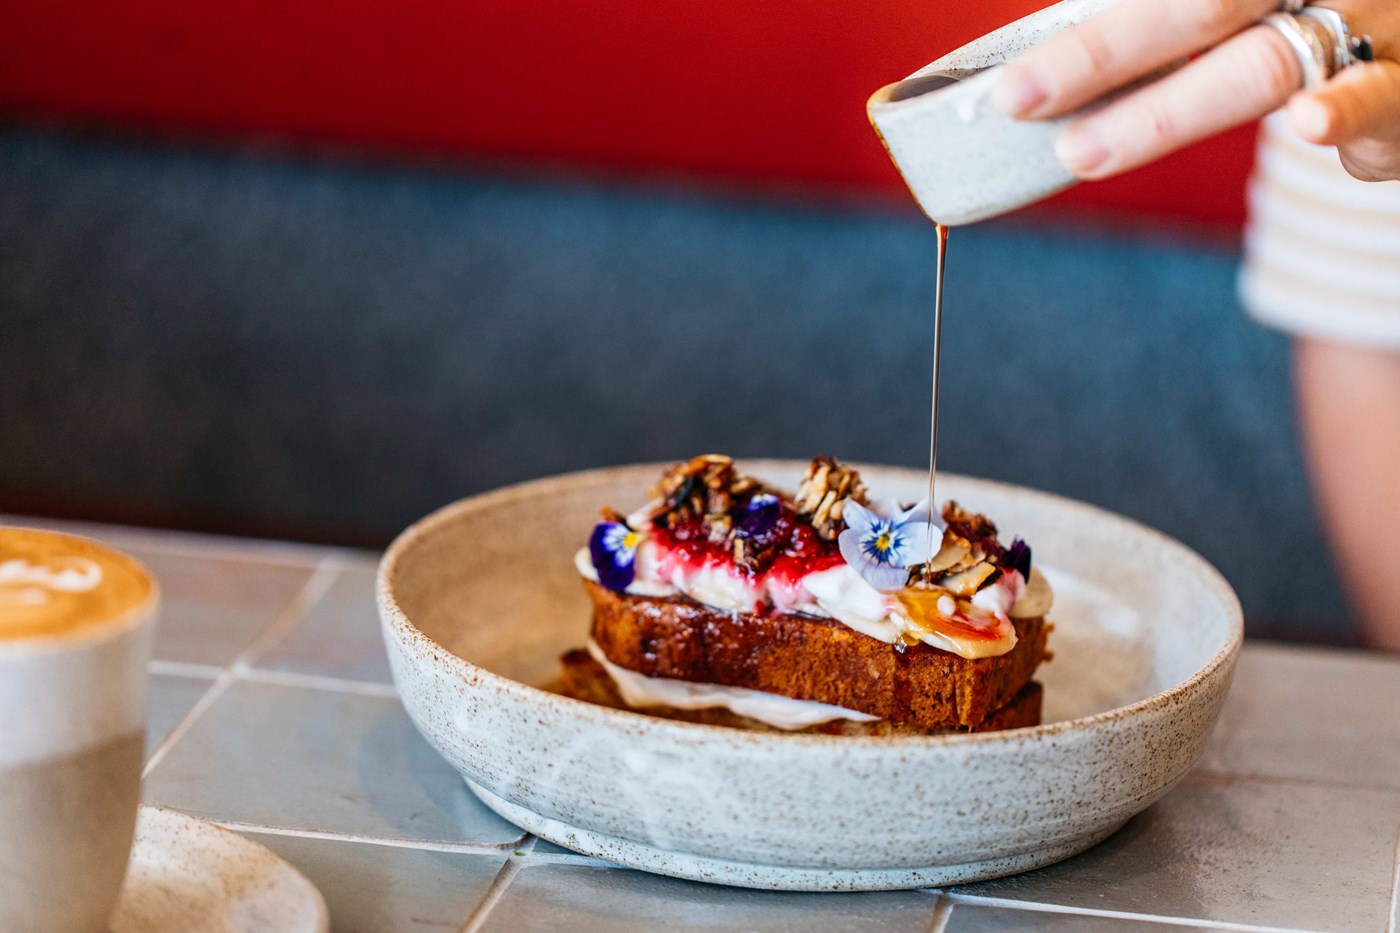 Best Cafes in Bondi: Maple syrup poured over French Toast at Porch and Parlour Bondi Beach